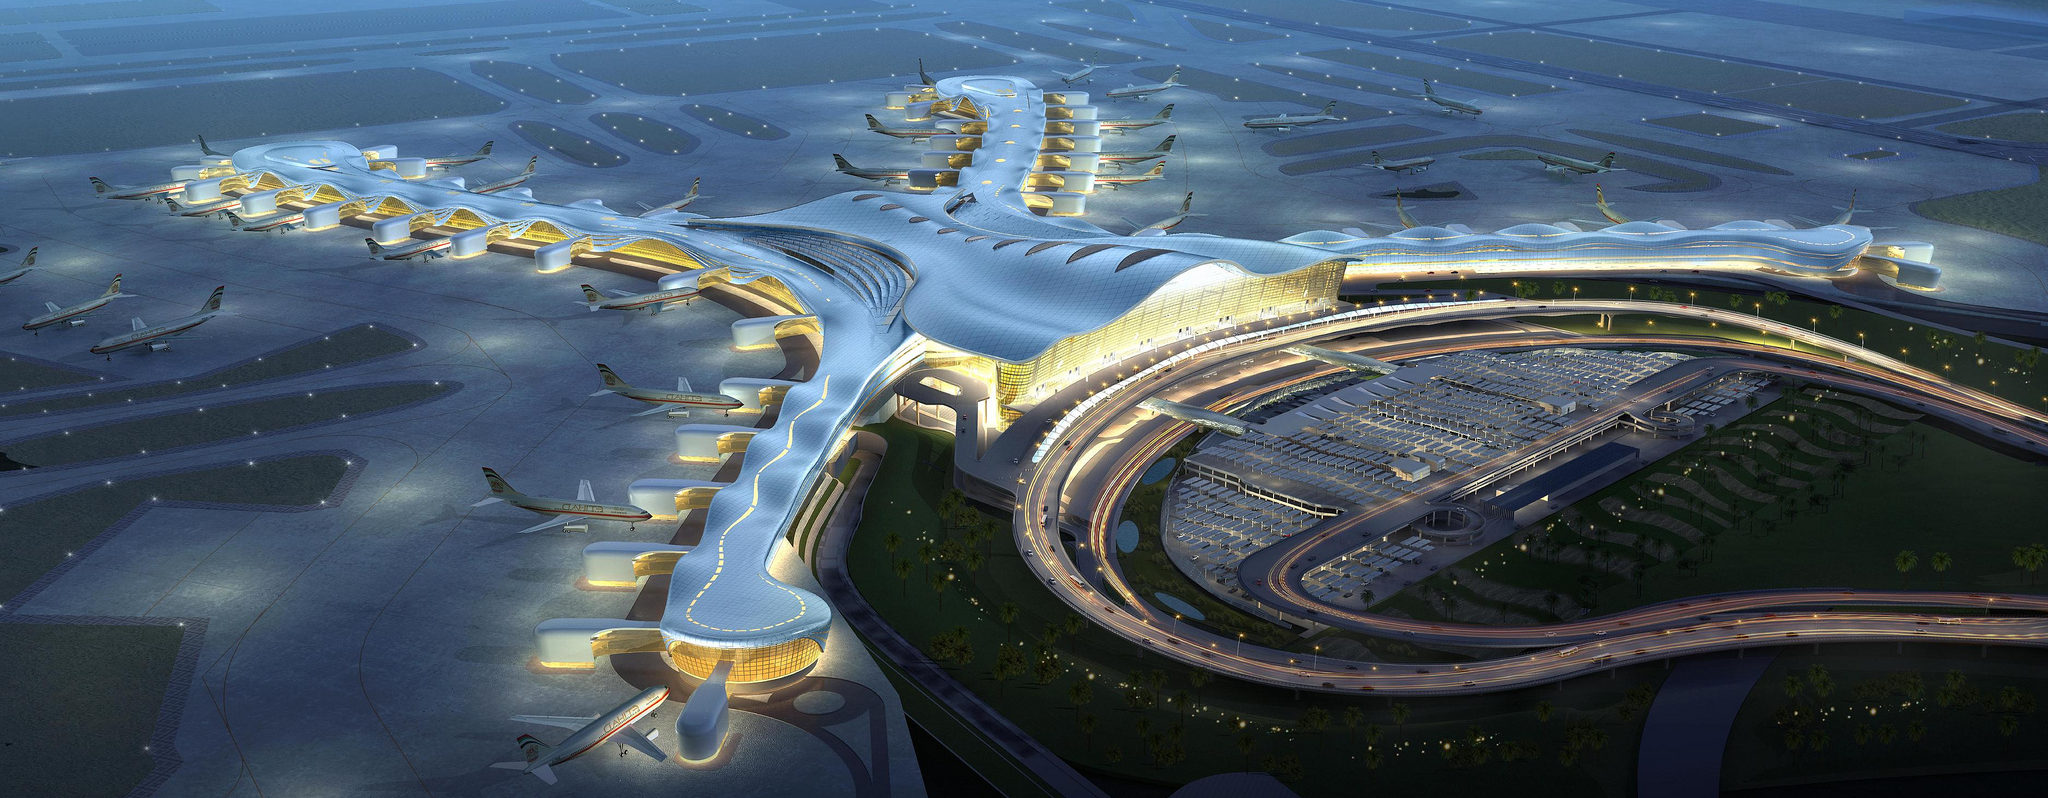 The new Midfield Terminal will be able to handle 30 million passengers a year